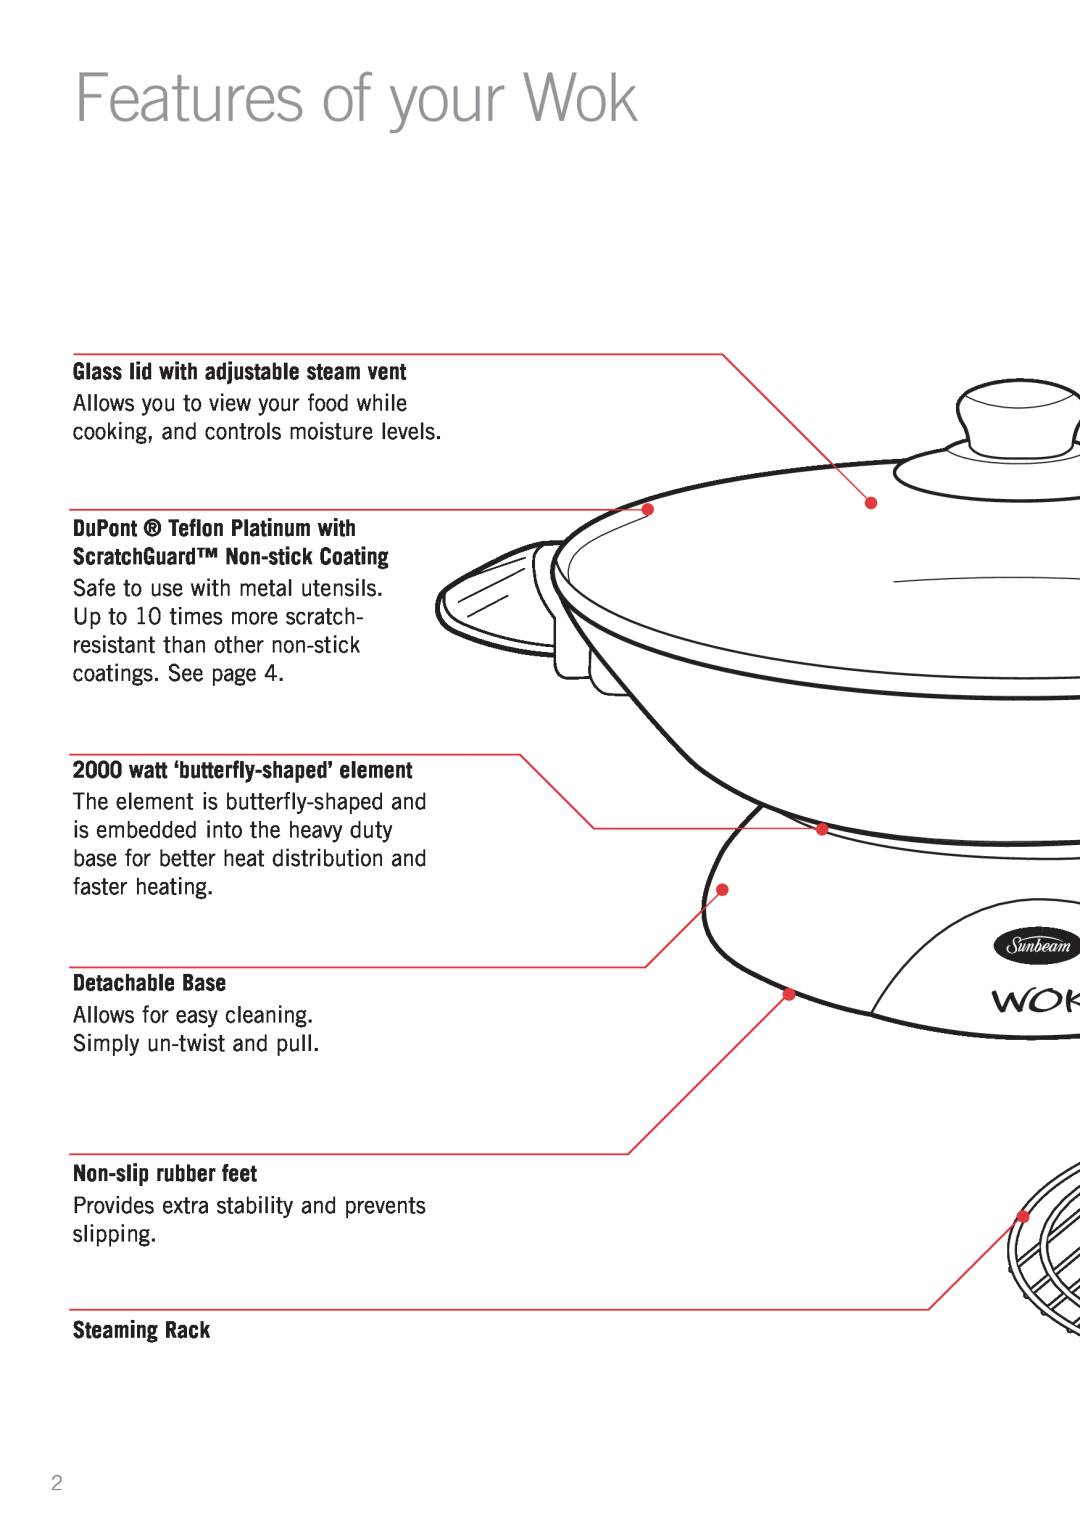 Sunbeam WW4300 Features of your Wok, Glass lid with adjustable steam vent, DuPont Teflon Platinum with, Detachable Base 